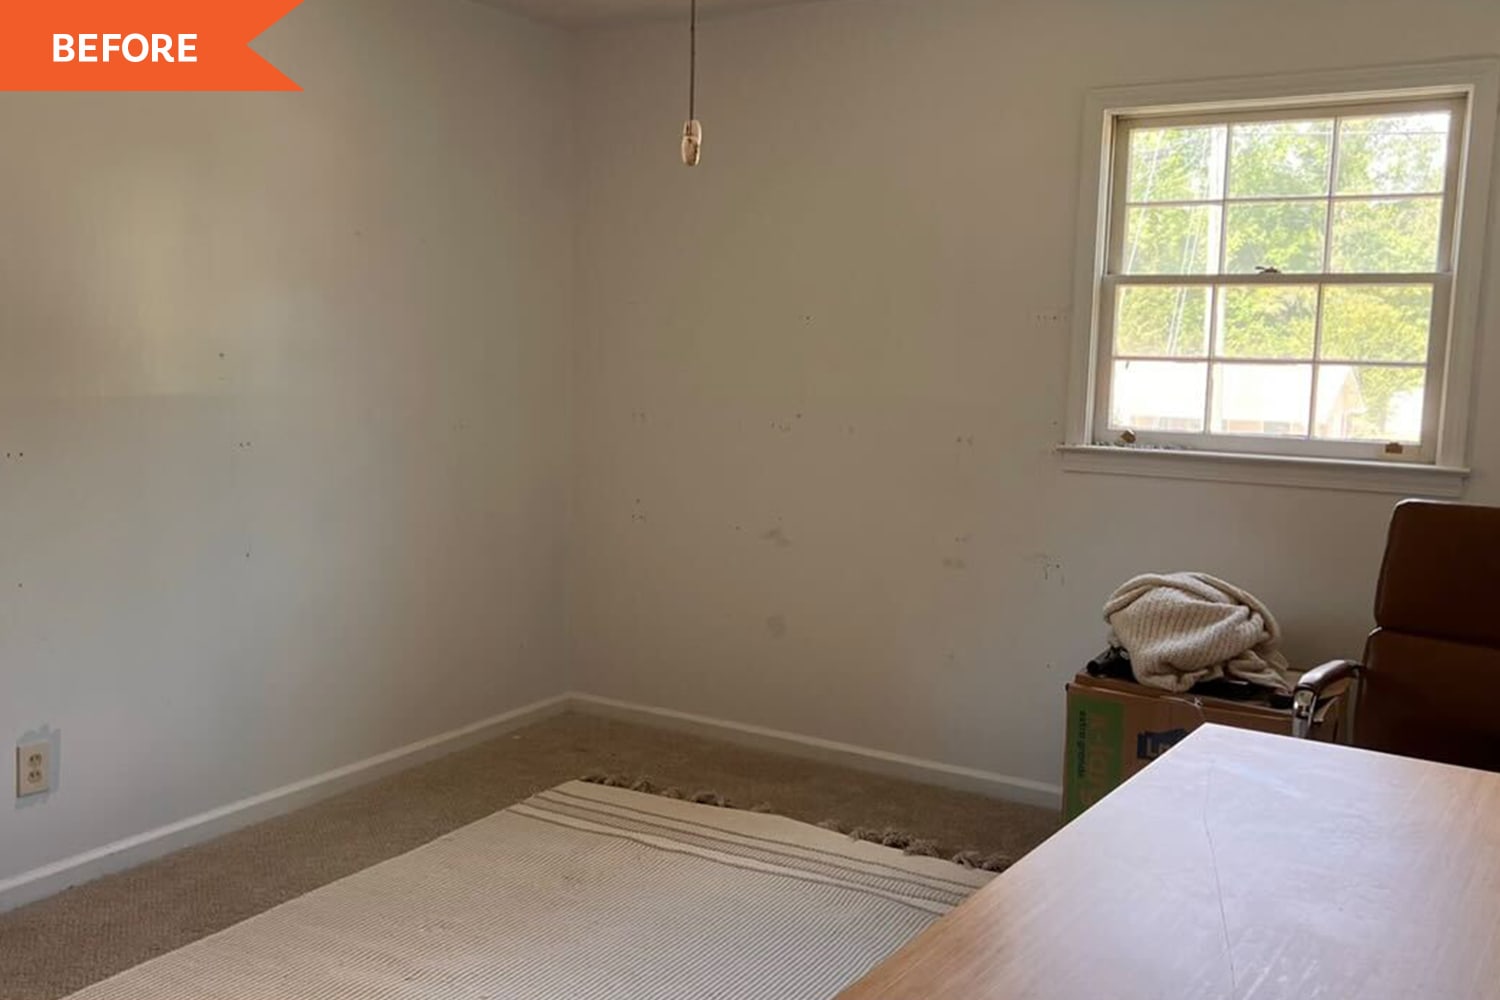 Before & After: A Spare Bedroom Gets Transformed into a Bright Home Office